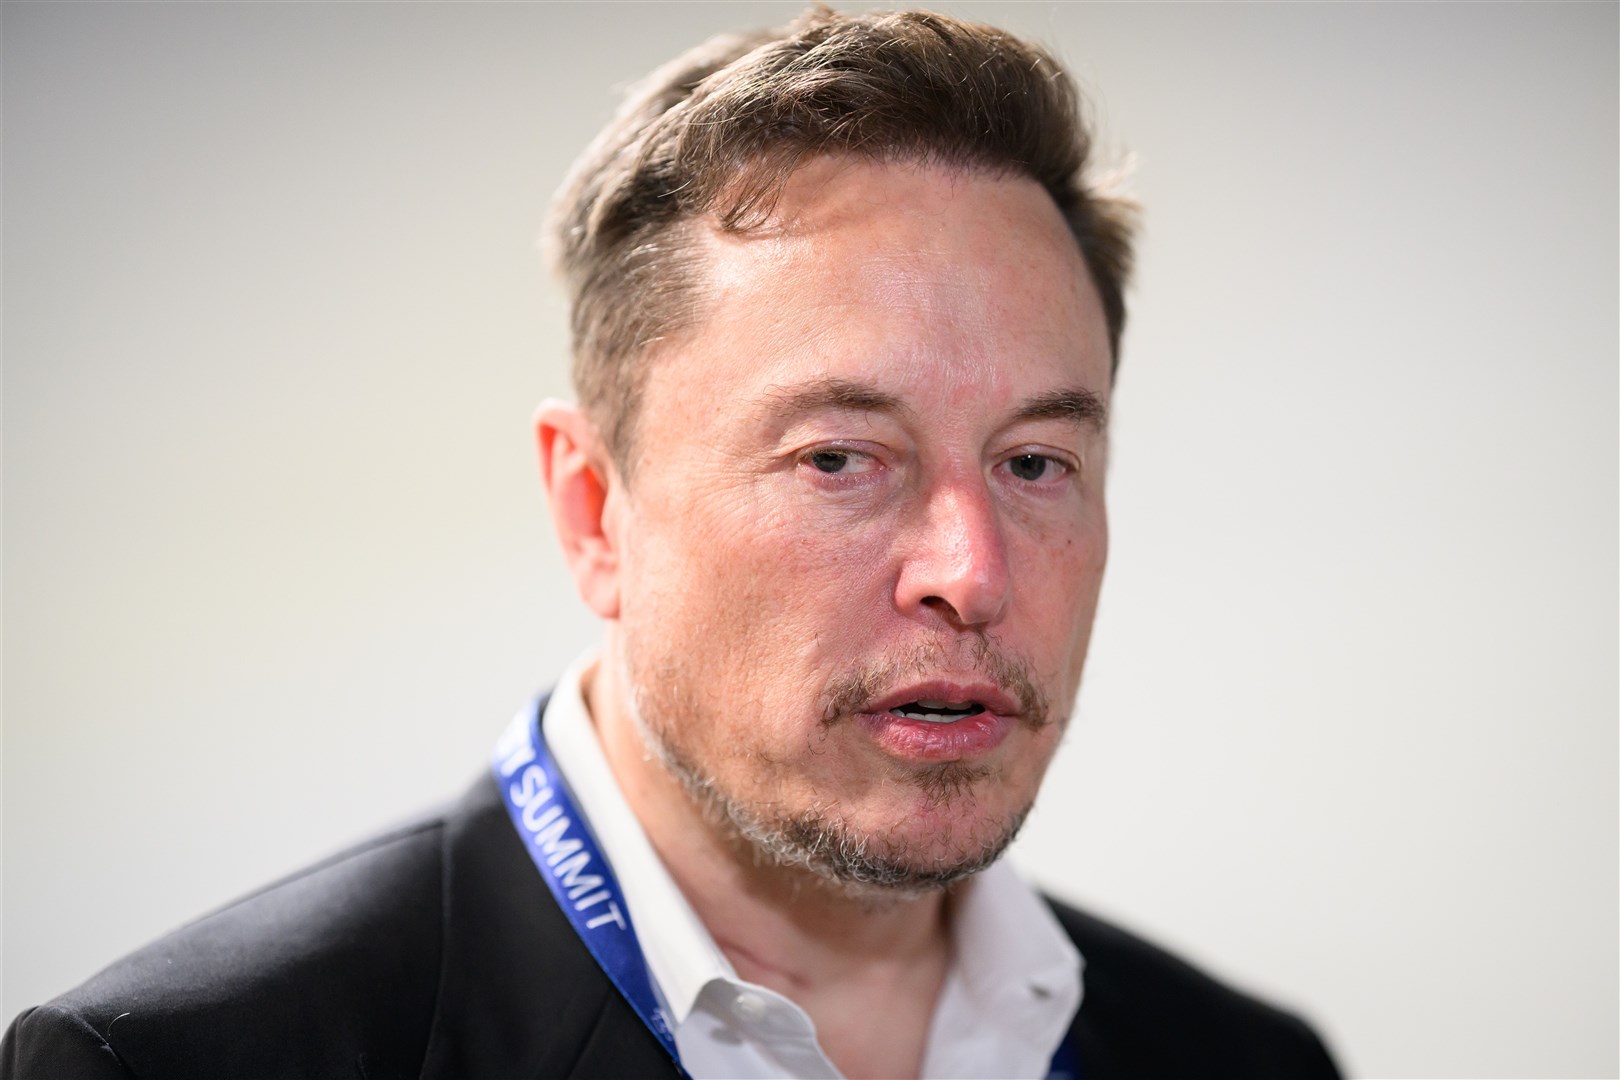 Tesla and SpaceX’s CEO Elon Musk during the opening plenary at the AI safety summit (Leon Neal/PA)